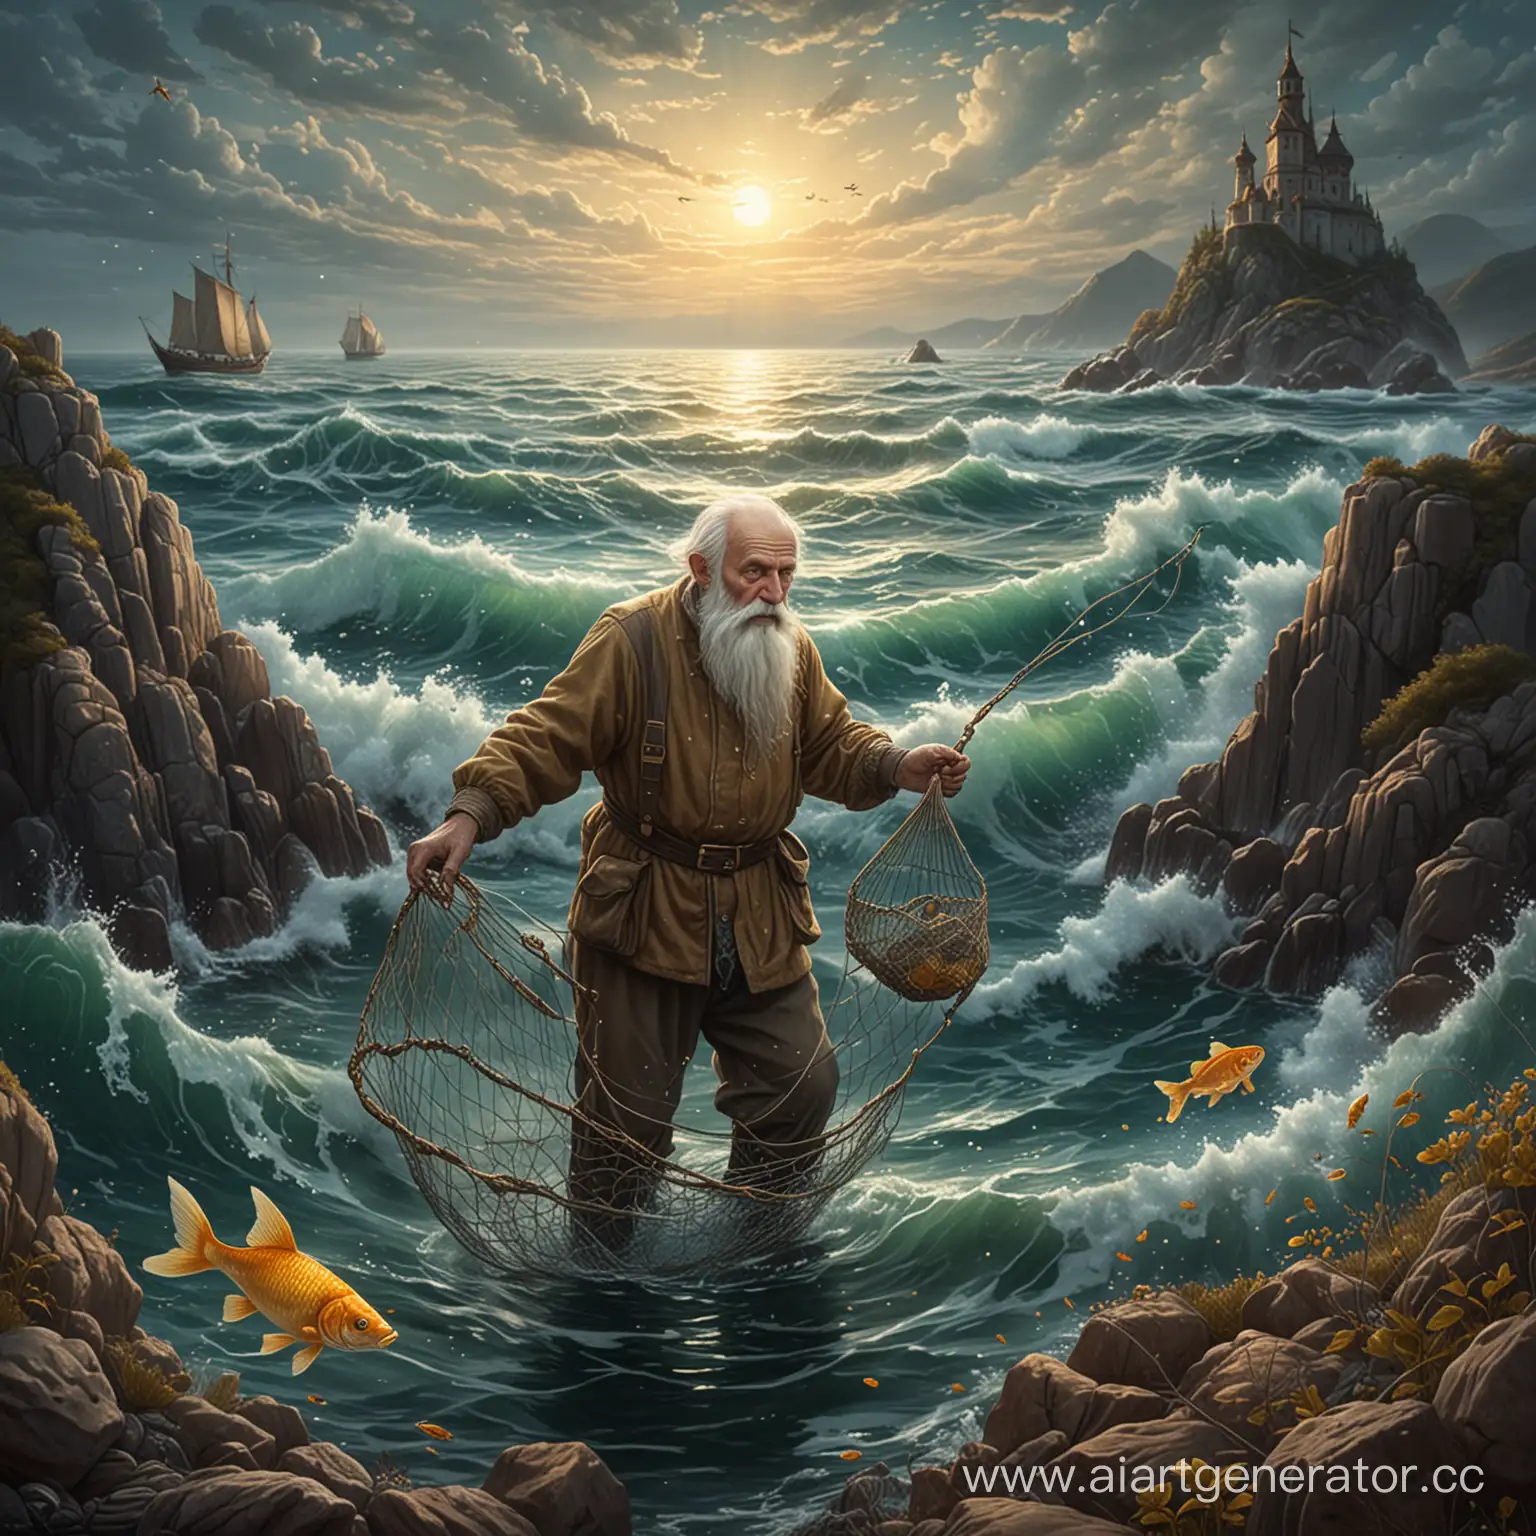 Golden-Fish-Caught-by-Old-Man-Russian-Fairy-Tale-Inspired-Art